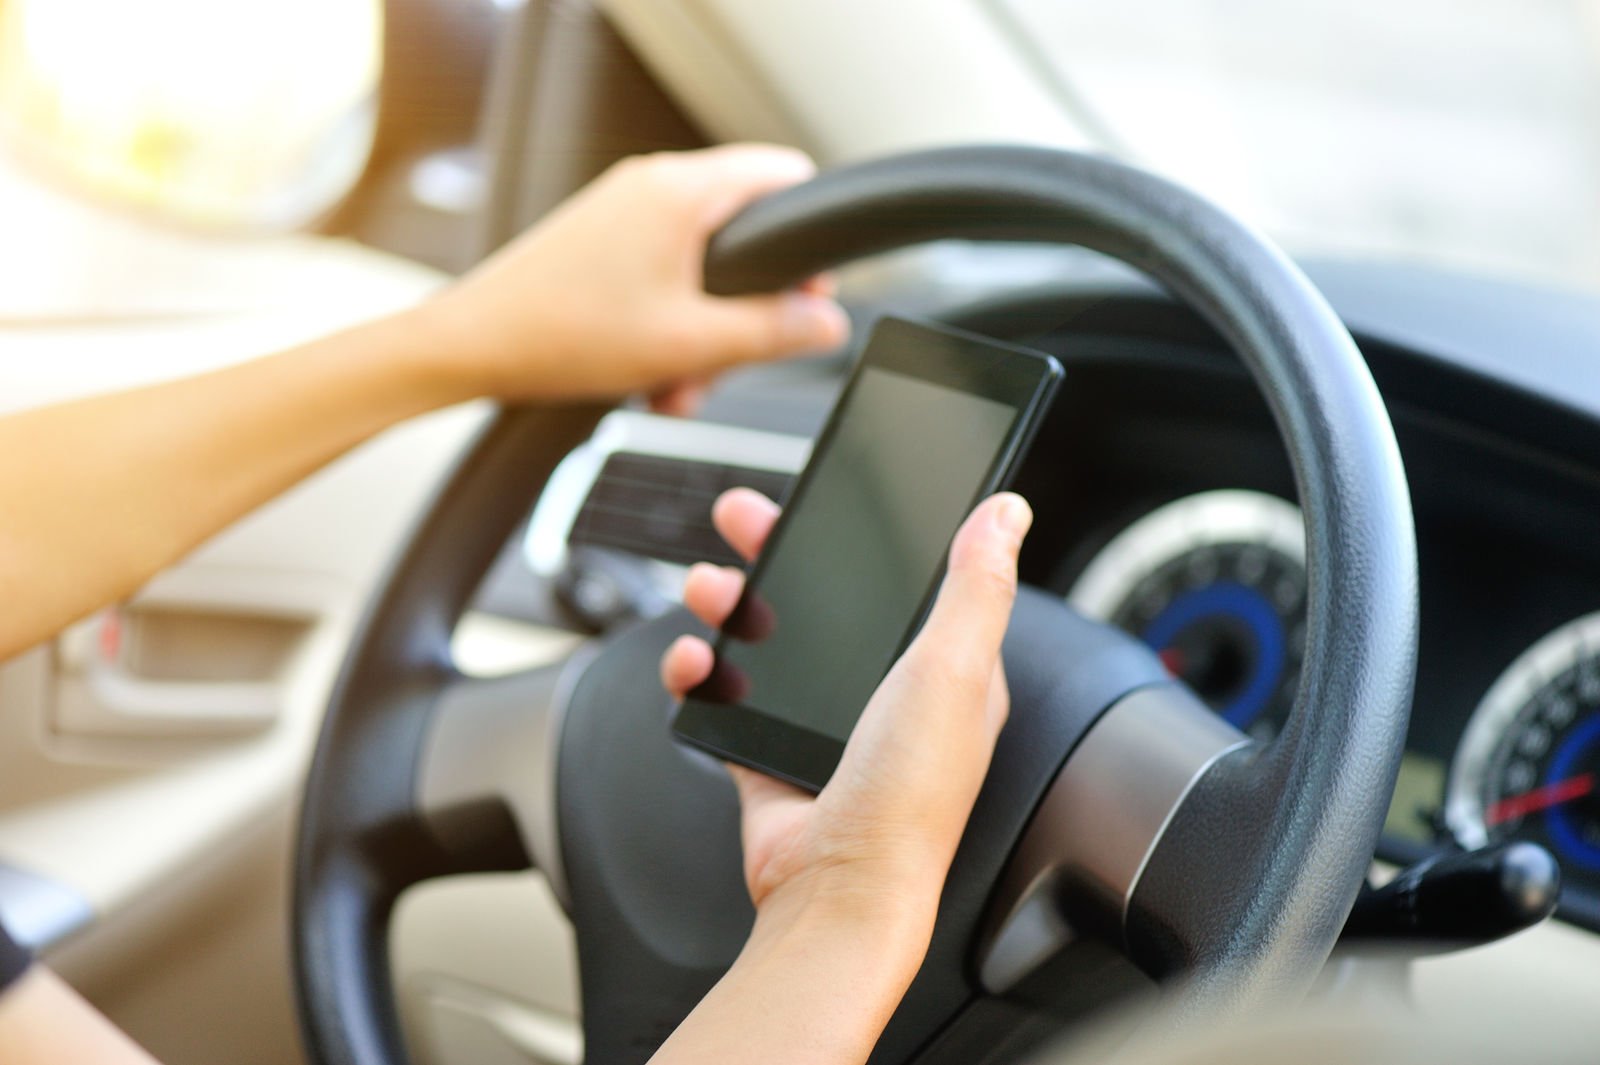 What are the top 10 ways to be distracted while driving?